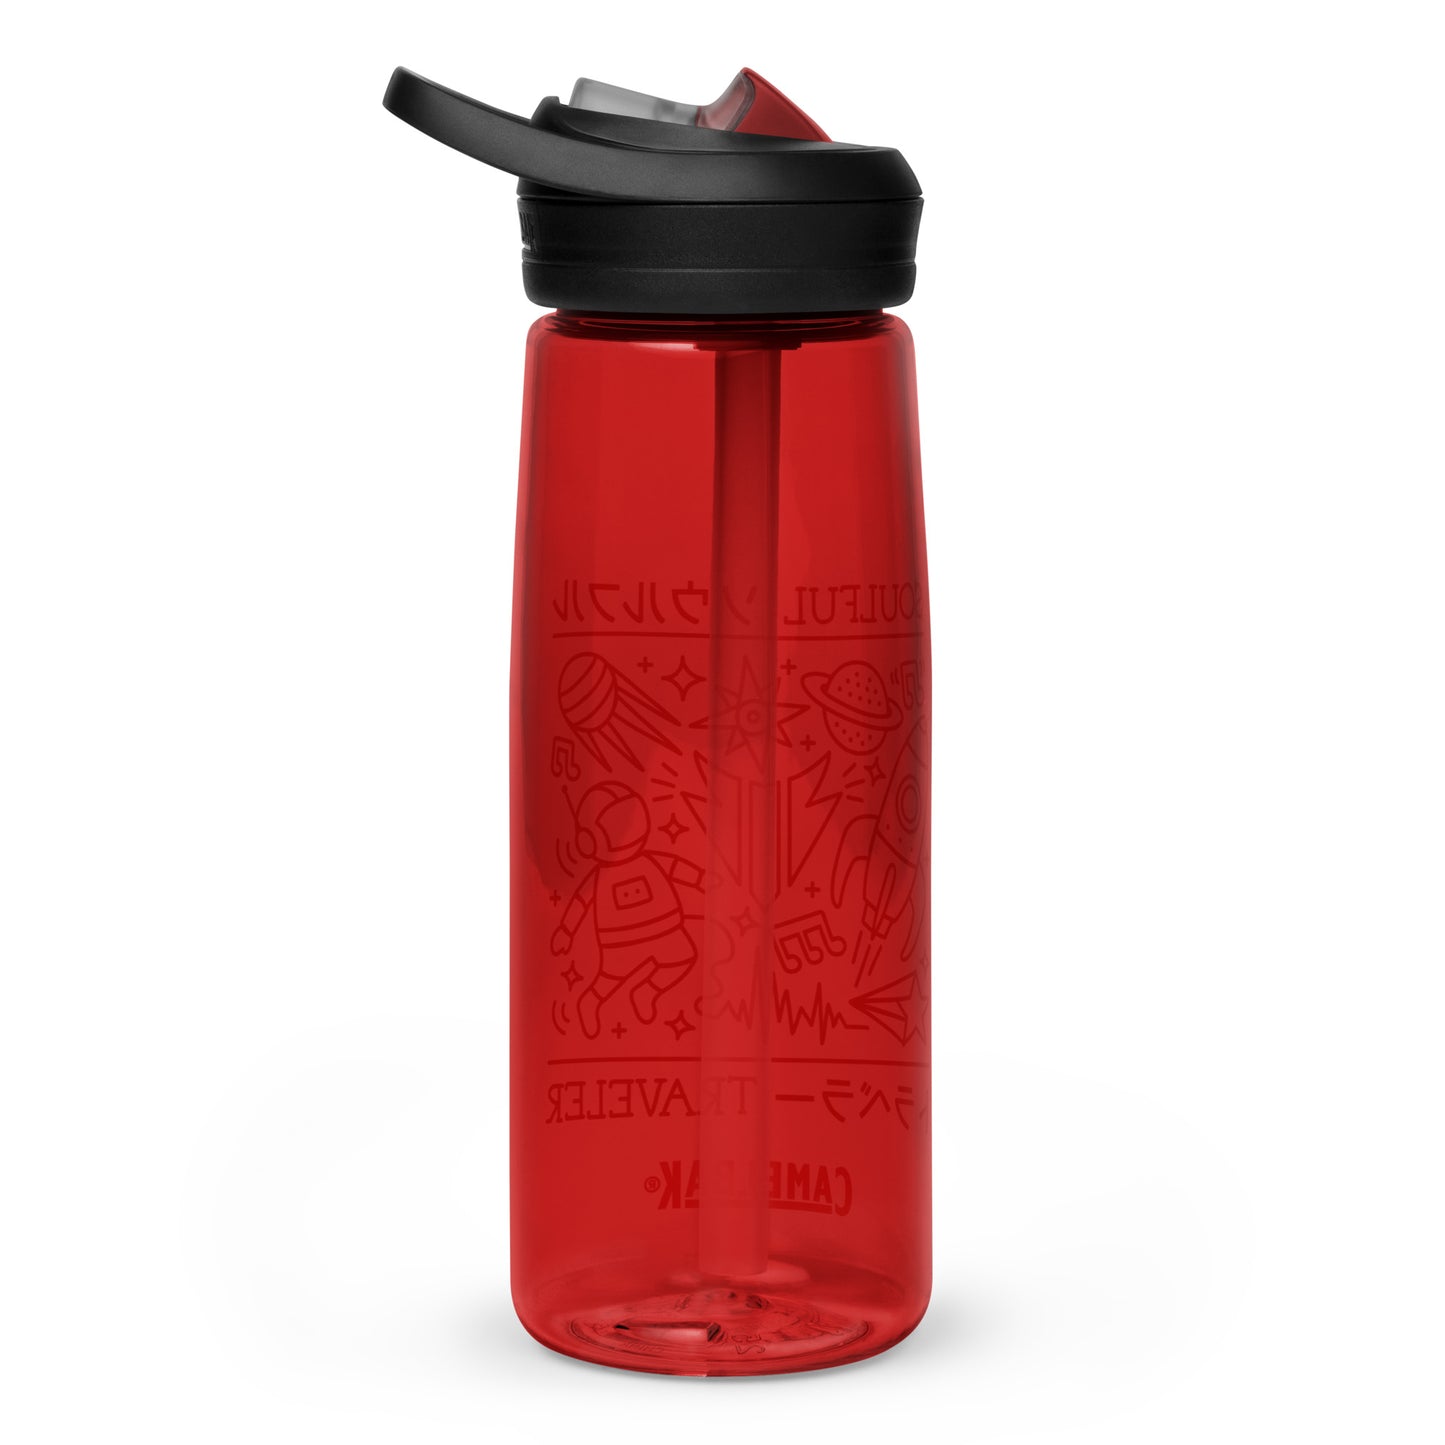 Soulful Traveler Collage Sports Water Bottle